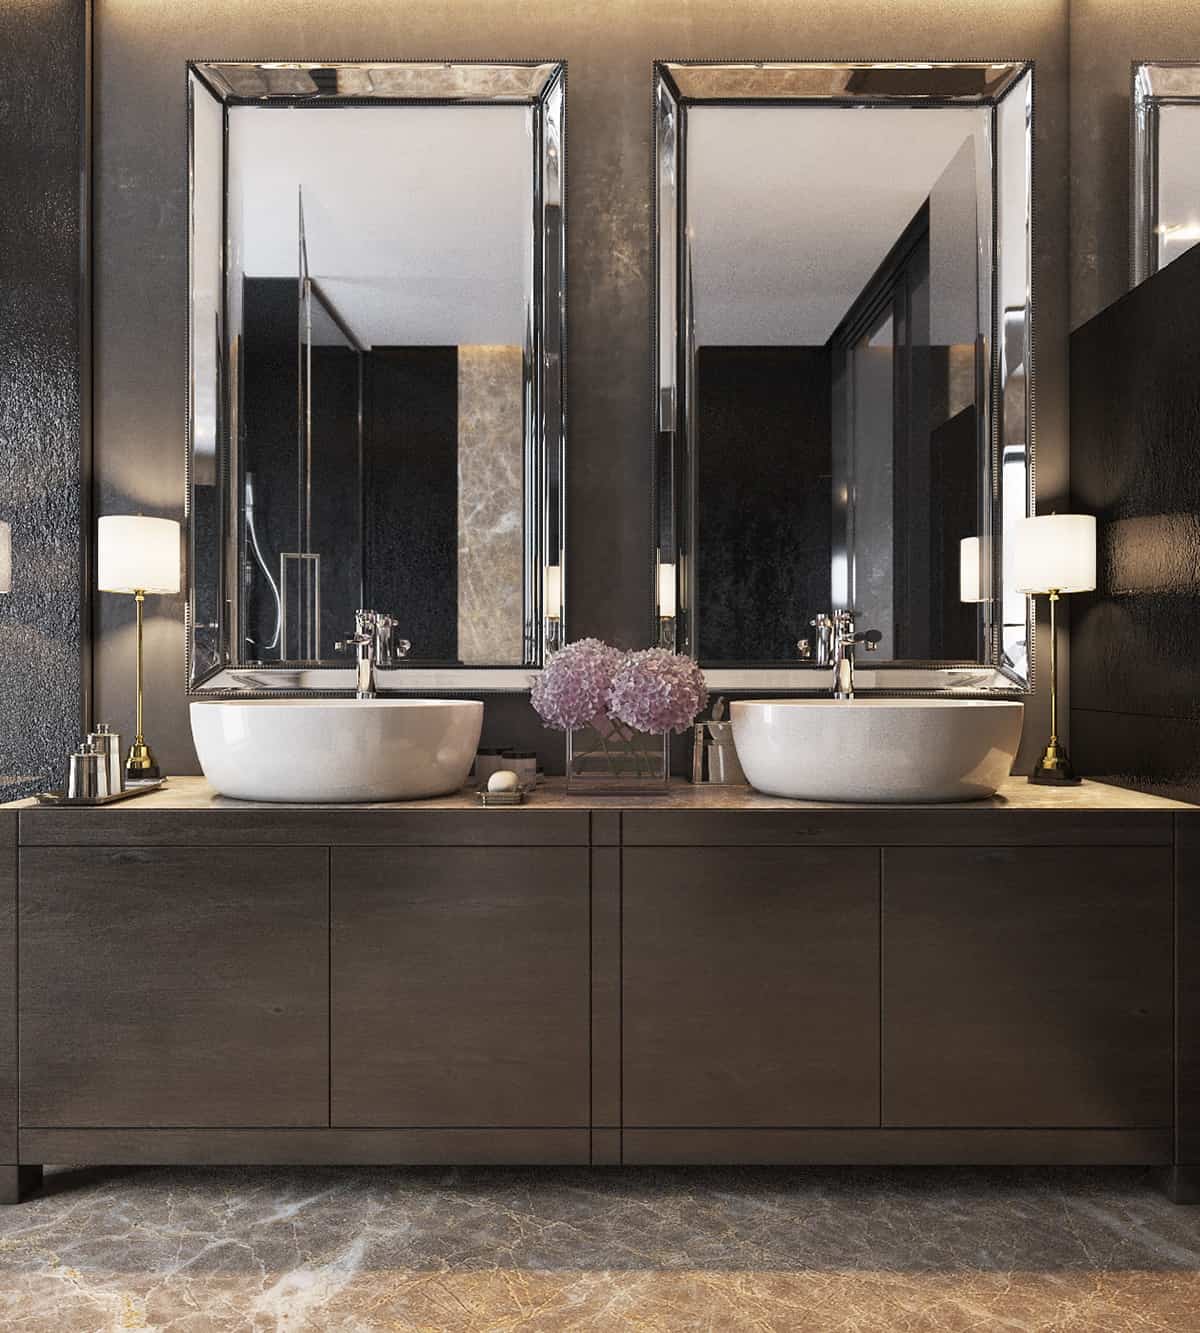 luxury apartments bathrooms with delightful fresh luxury apartments bathrooms images a0ds 2253 inside magnificent luxury apartments bathrooms